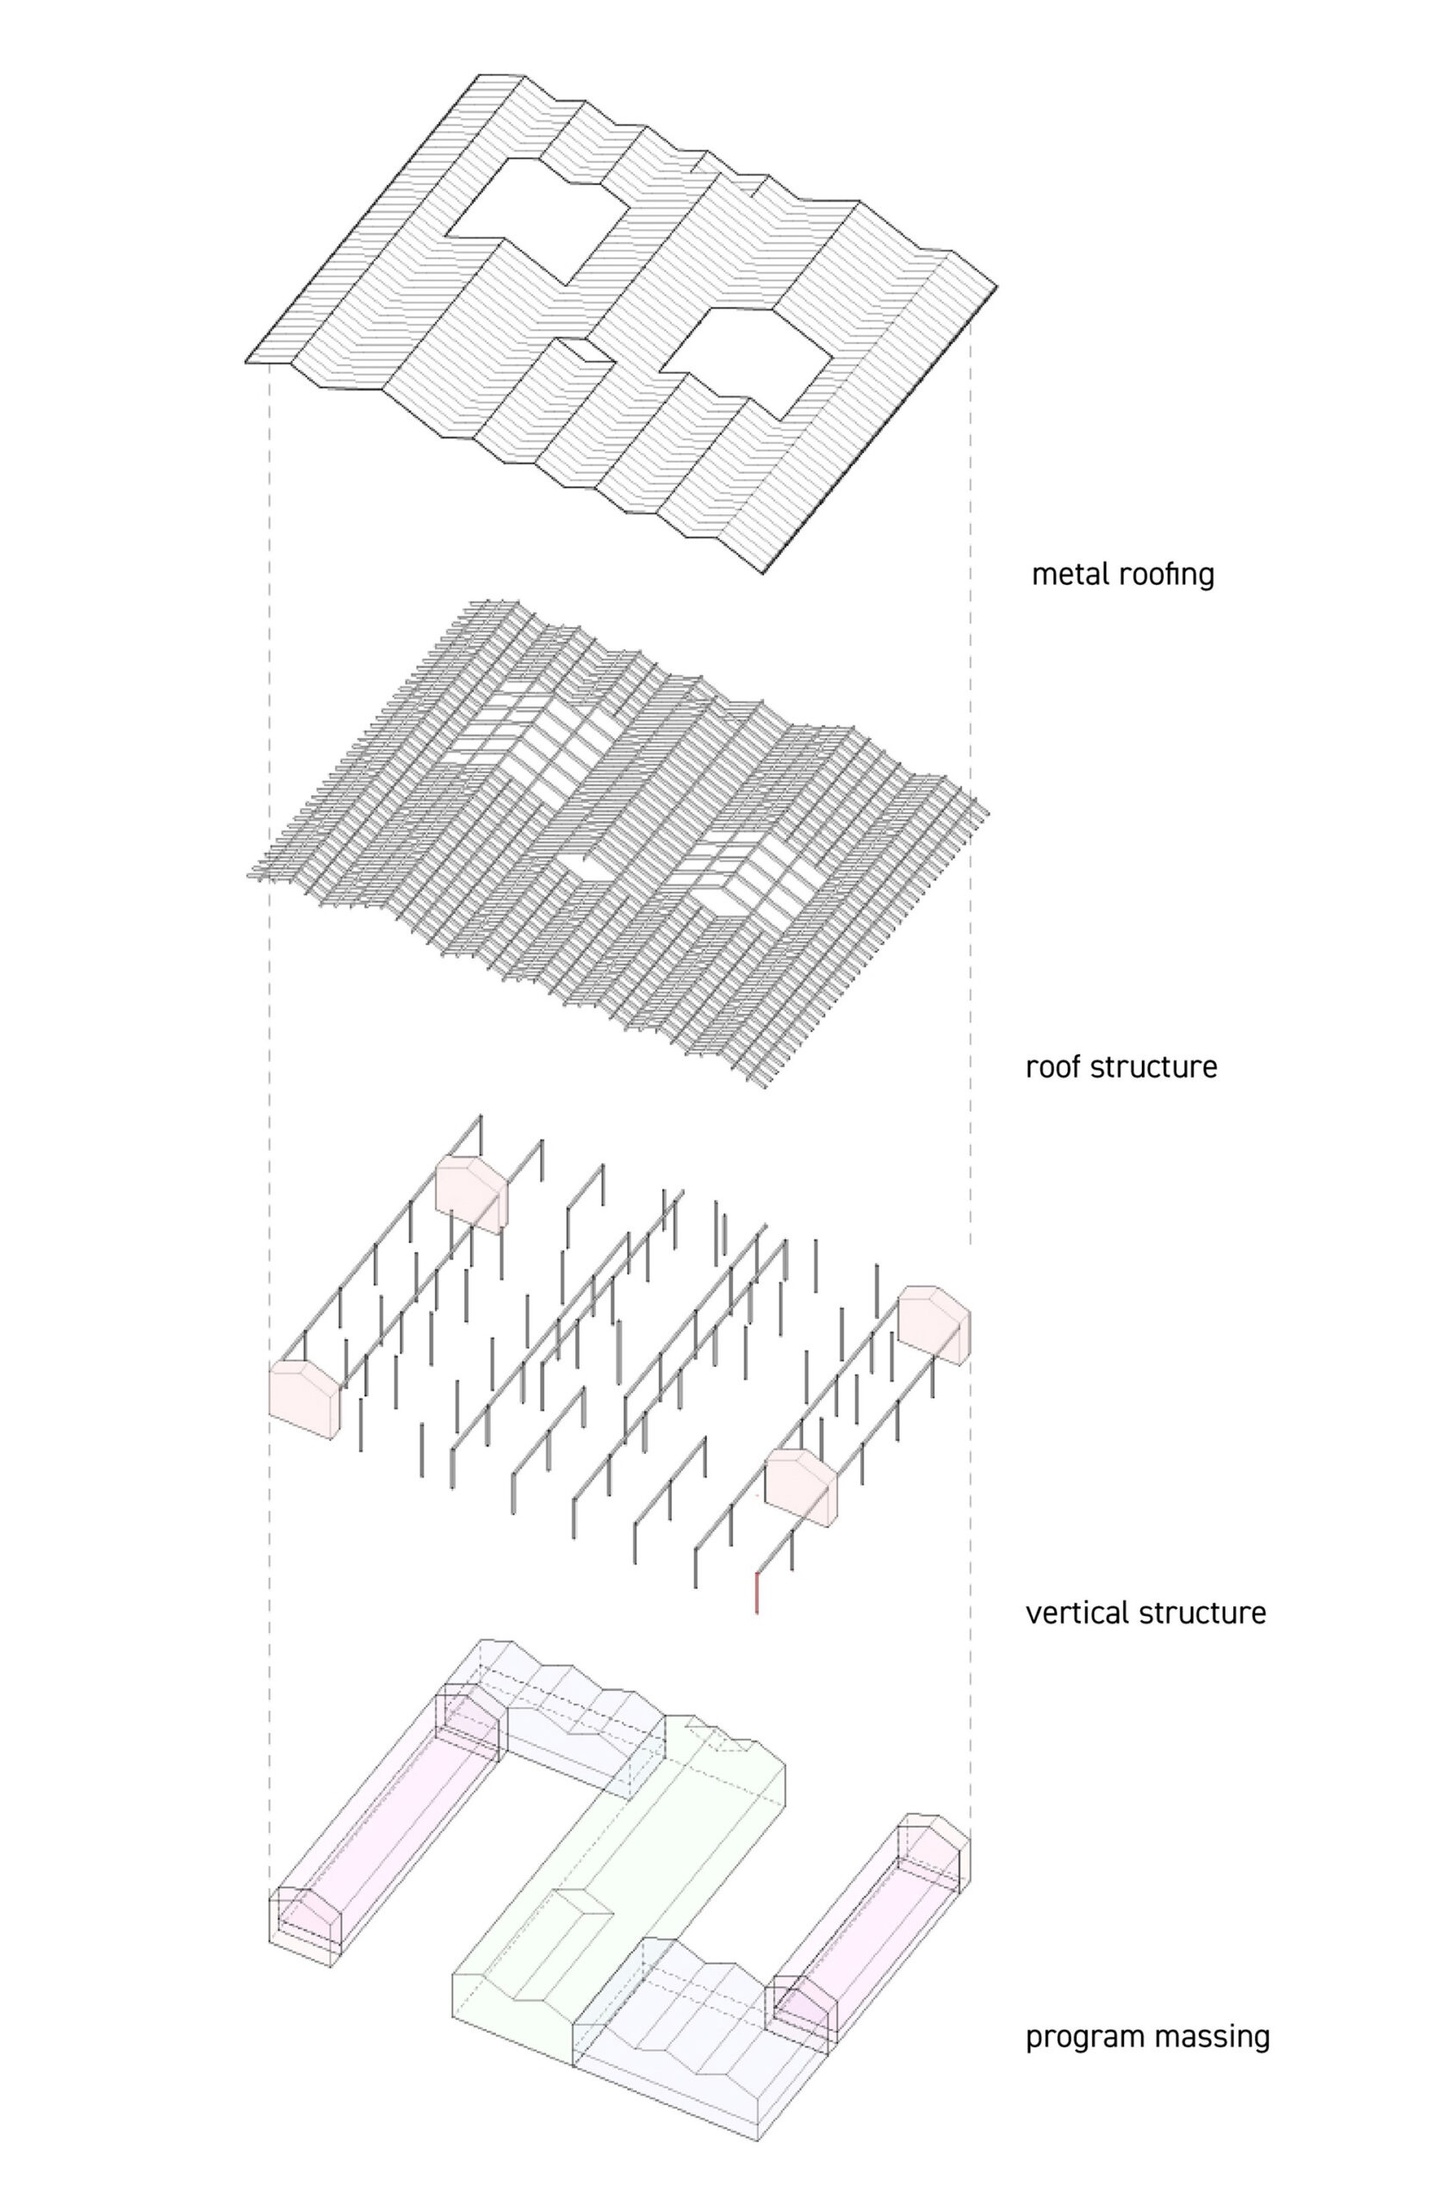 Computer drawing of an exploding axonometric diagram with text labels: program massing, vertical structure, roof structure, and metal roofing.